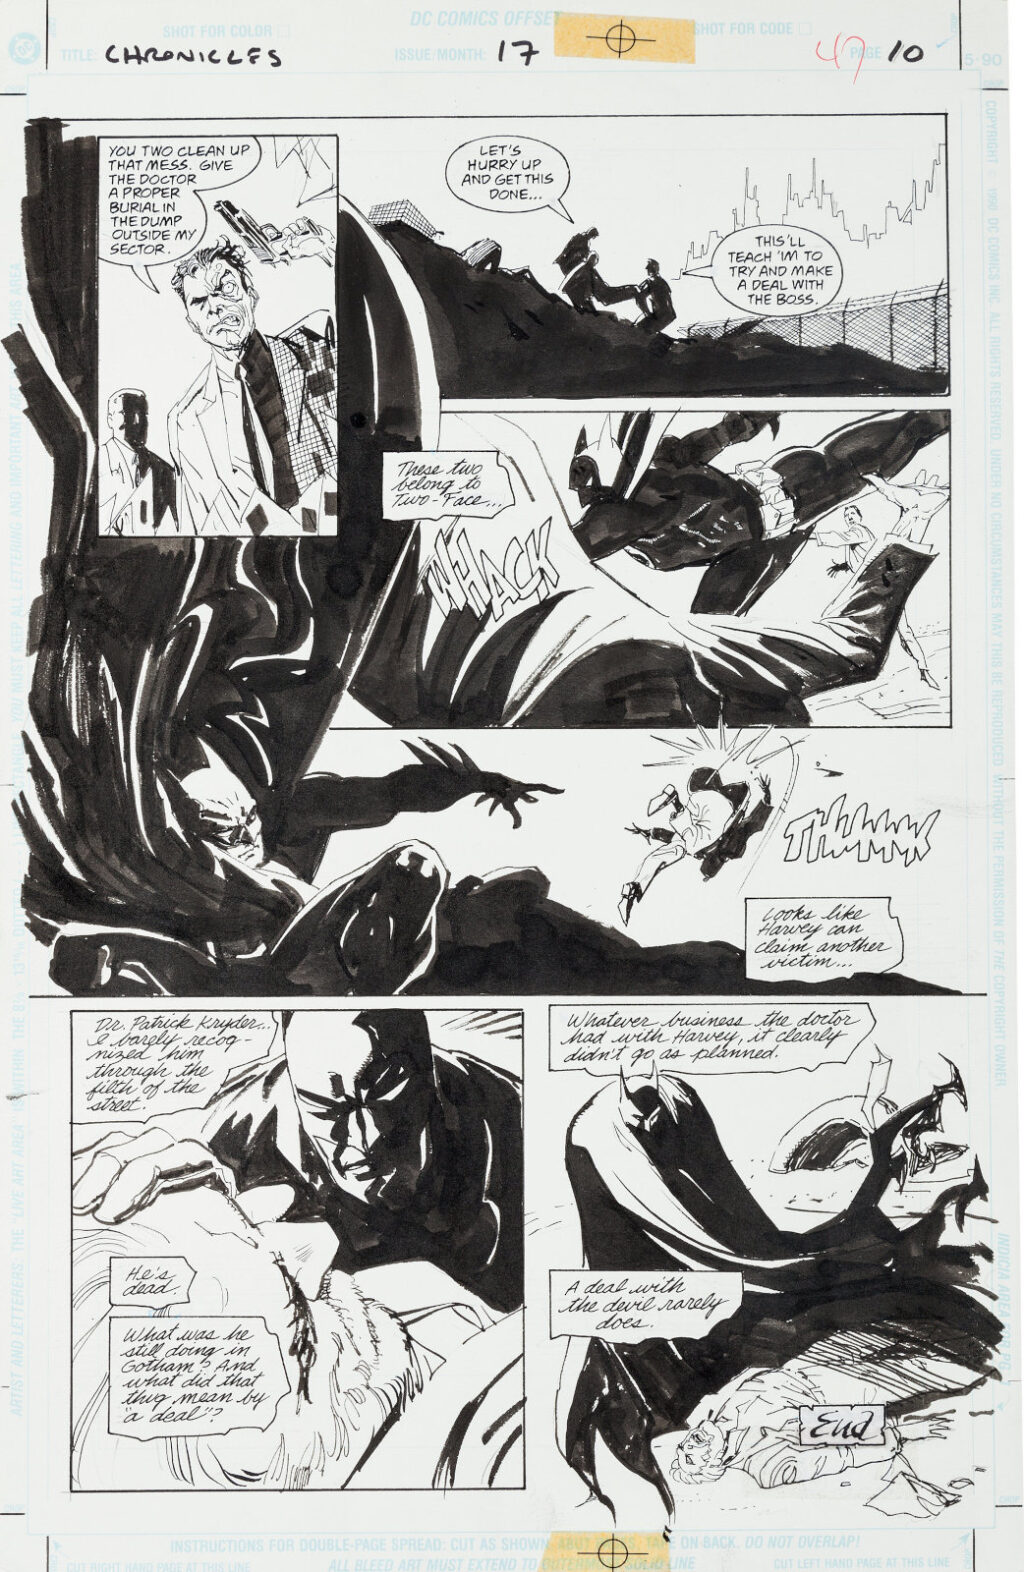 Batman Chronicles issue 17 page 10 by Graham Nolan and Bill Sienkiewicz